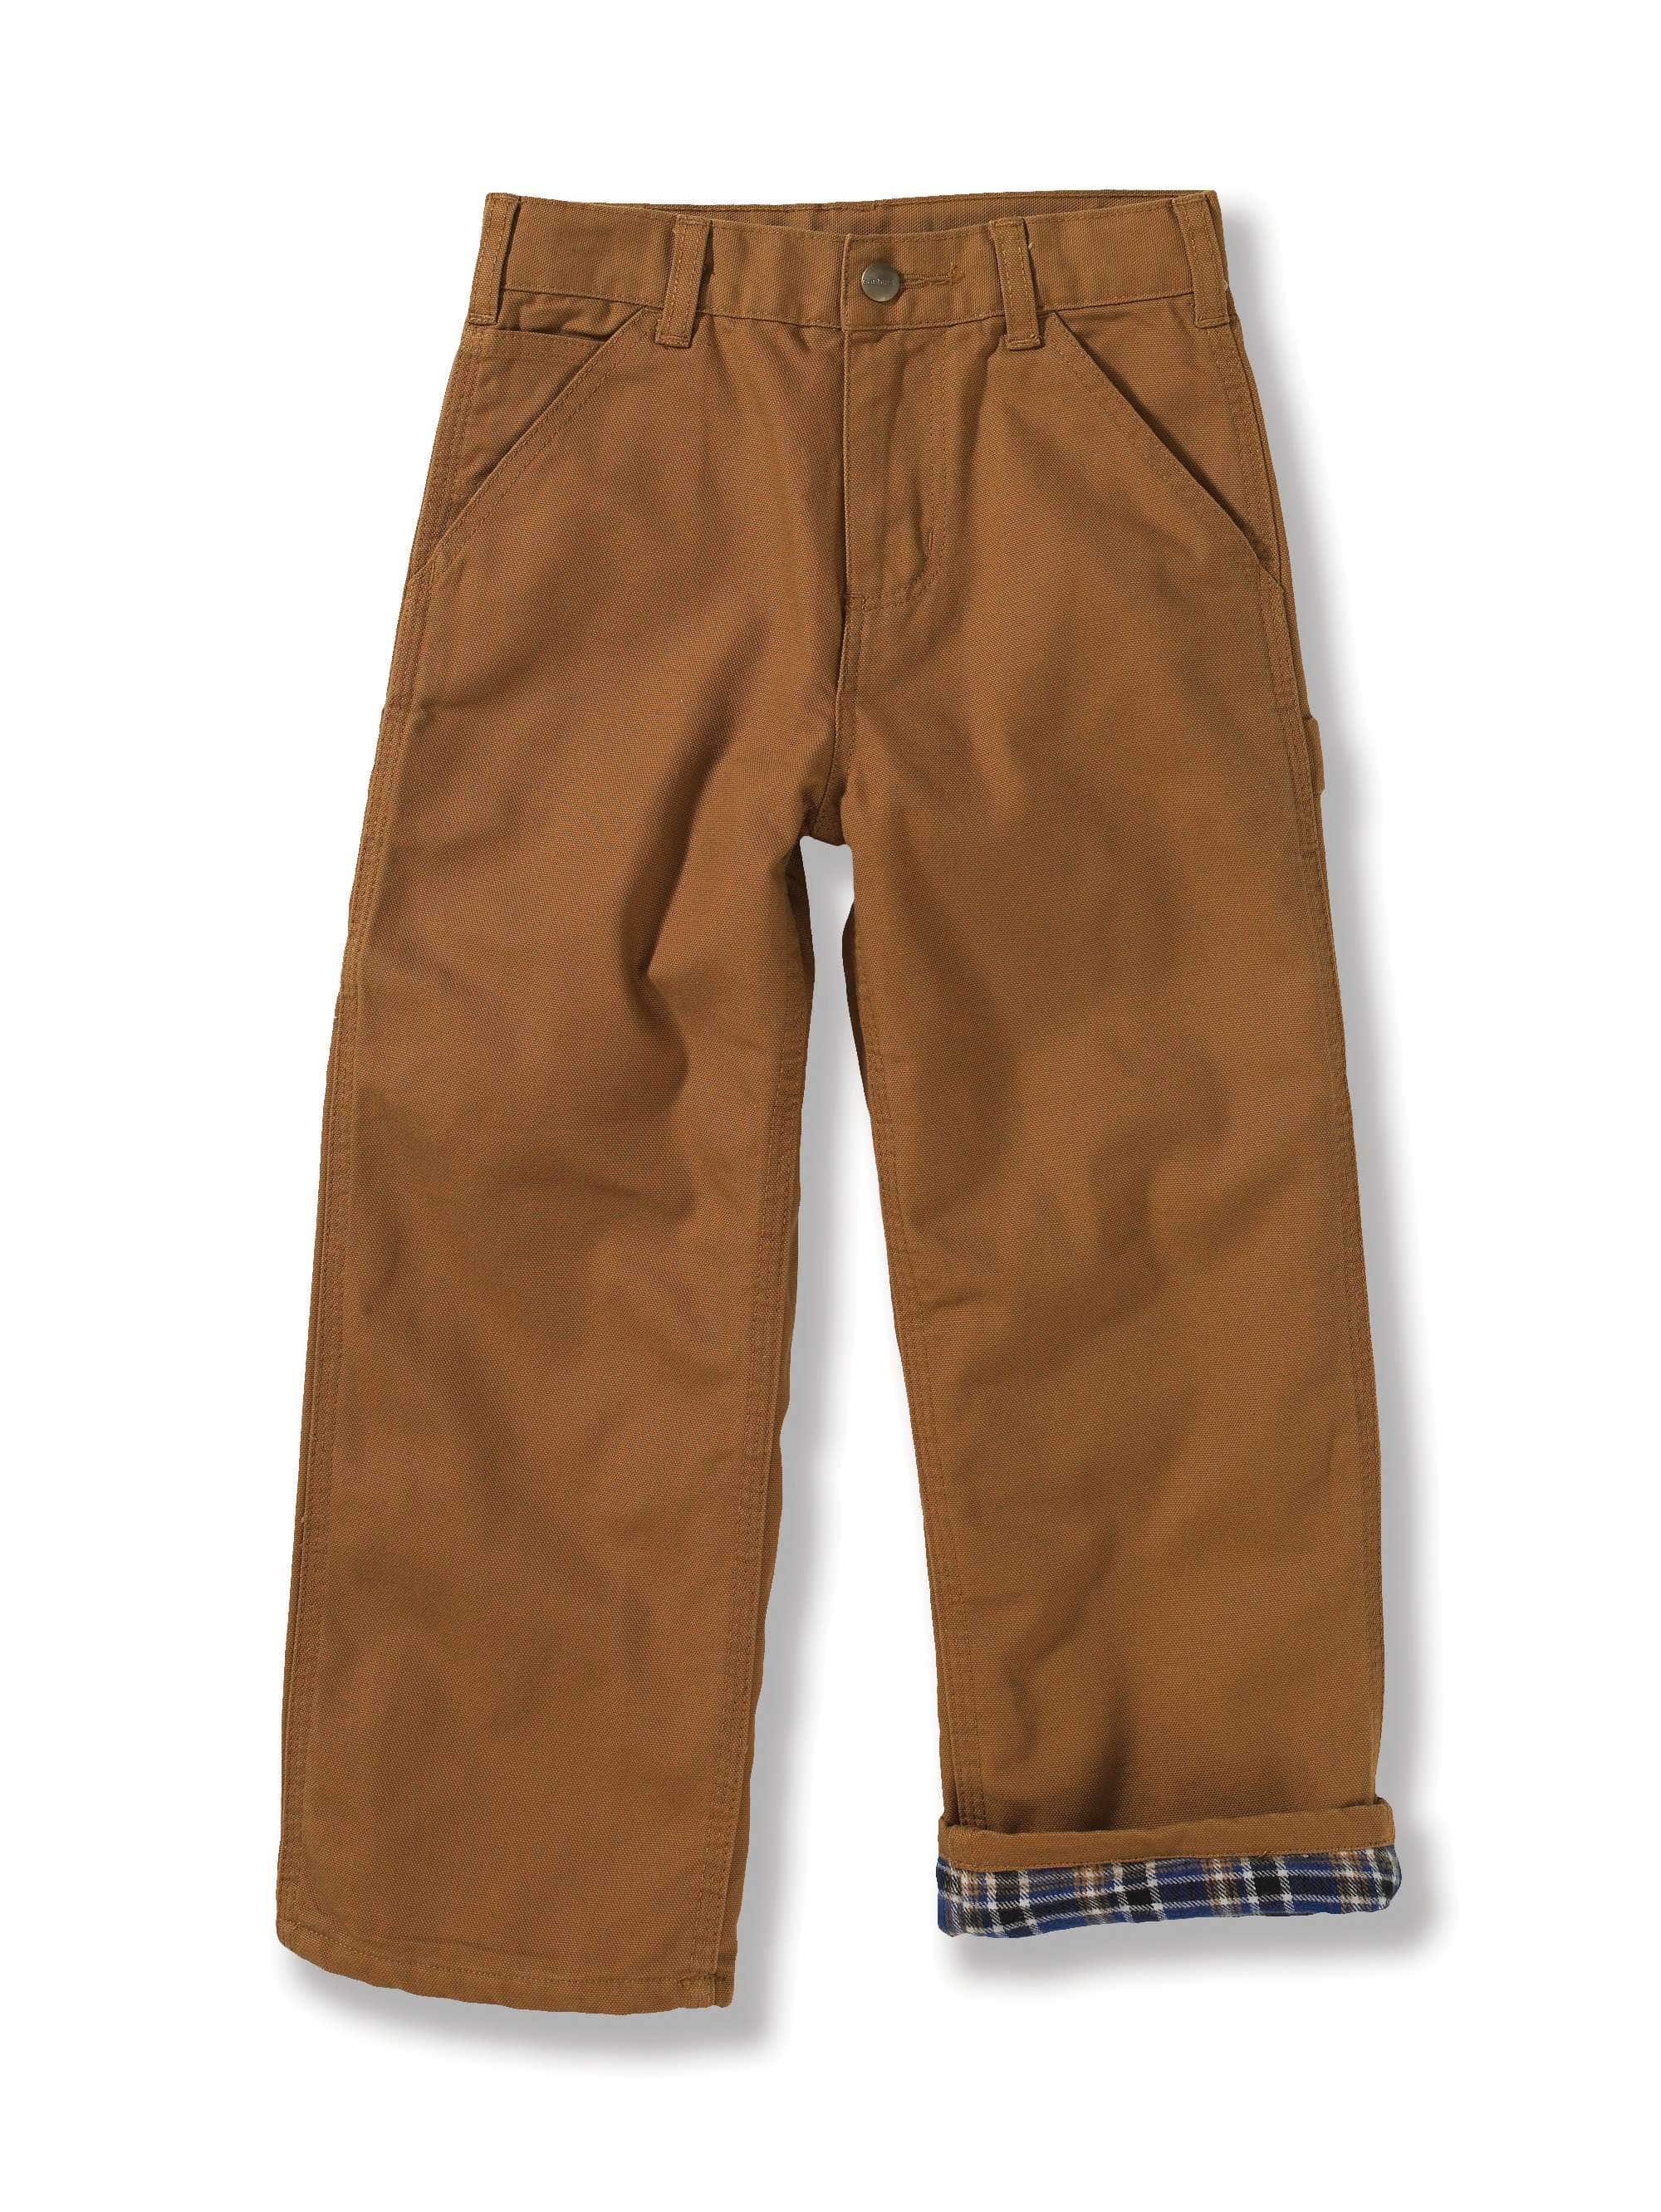 boys flannel lined cargo pants